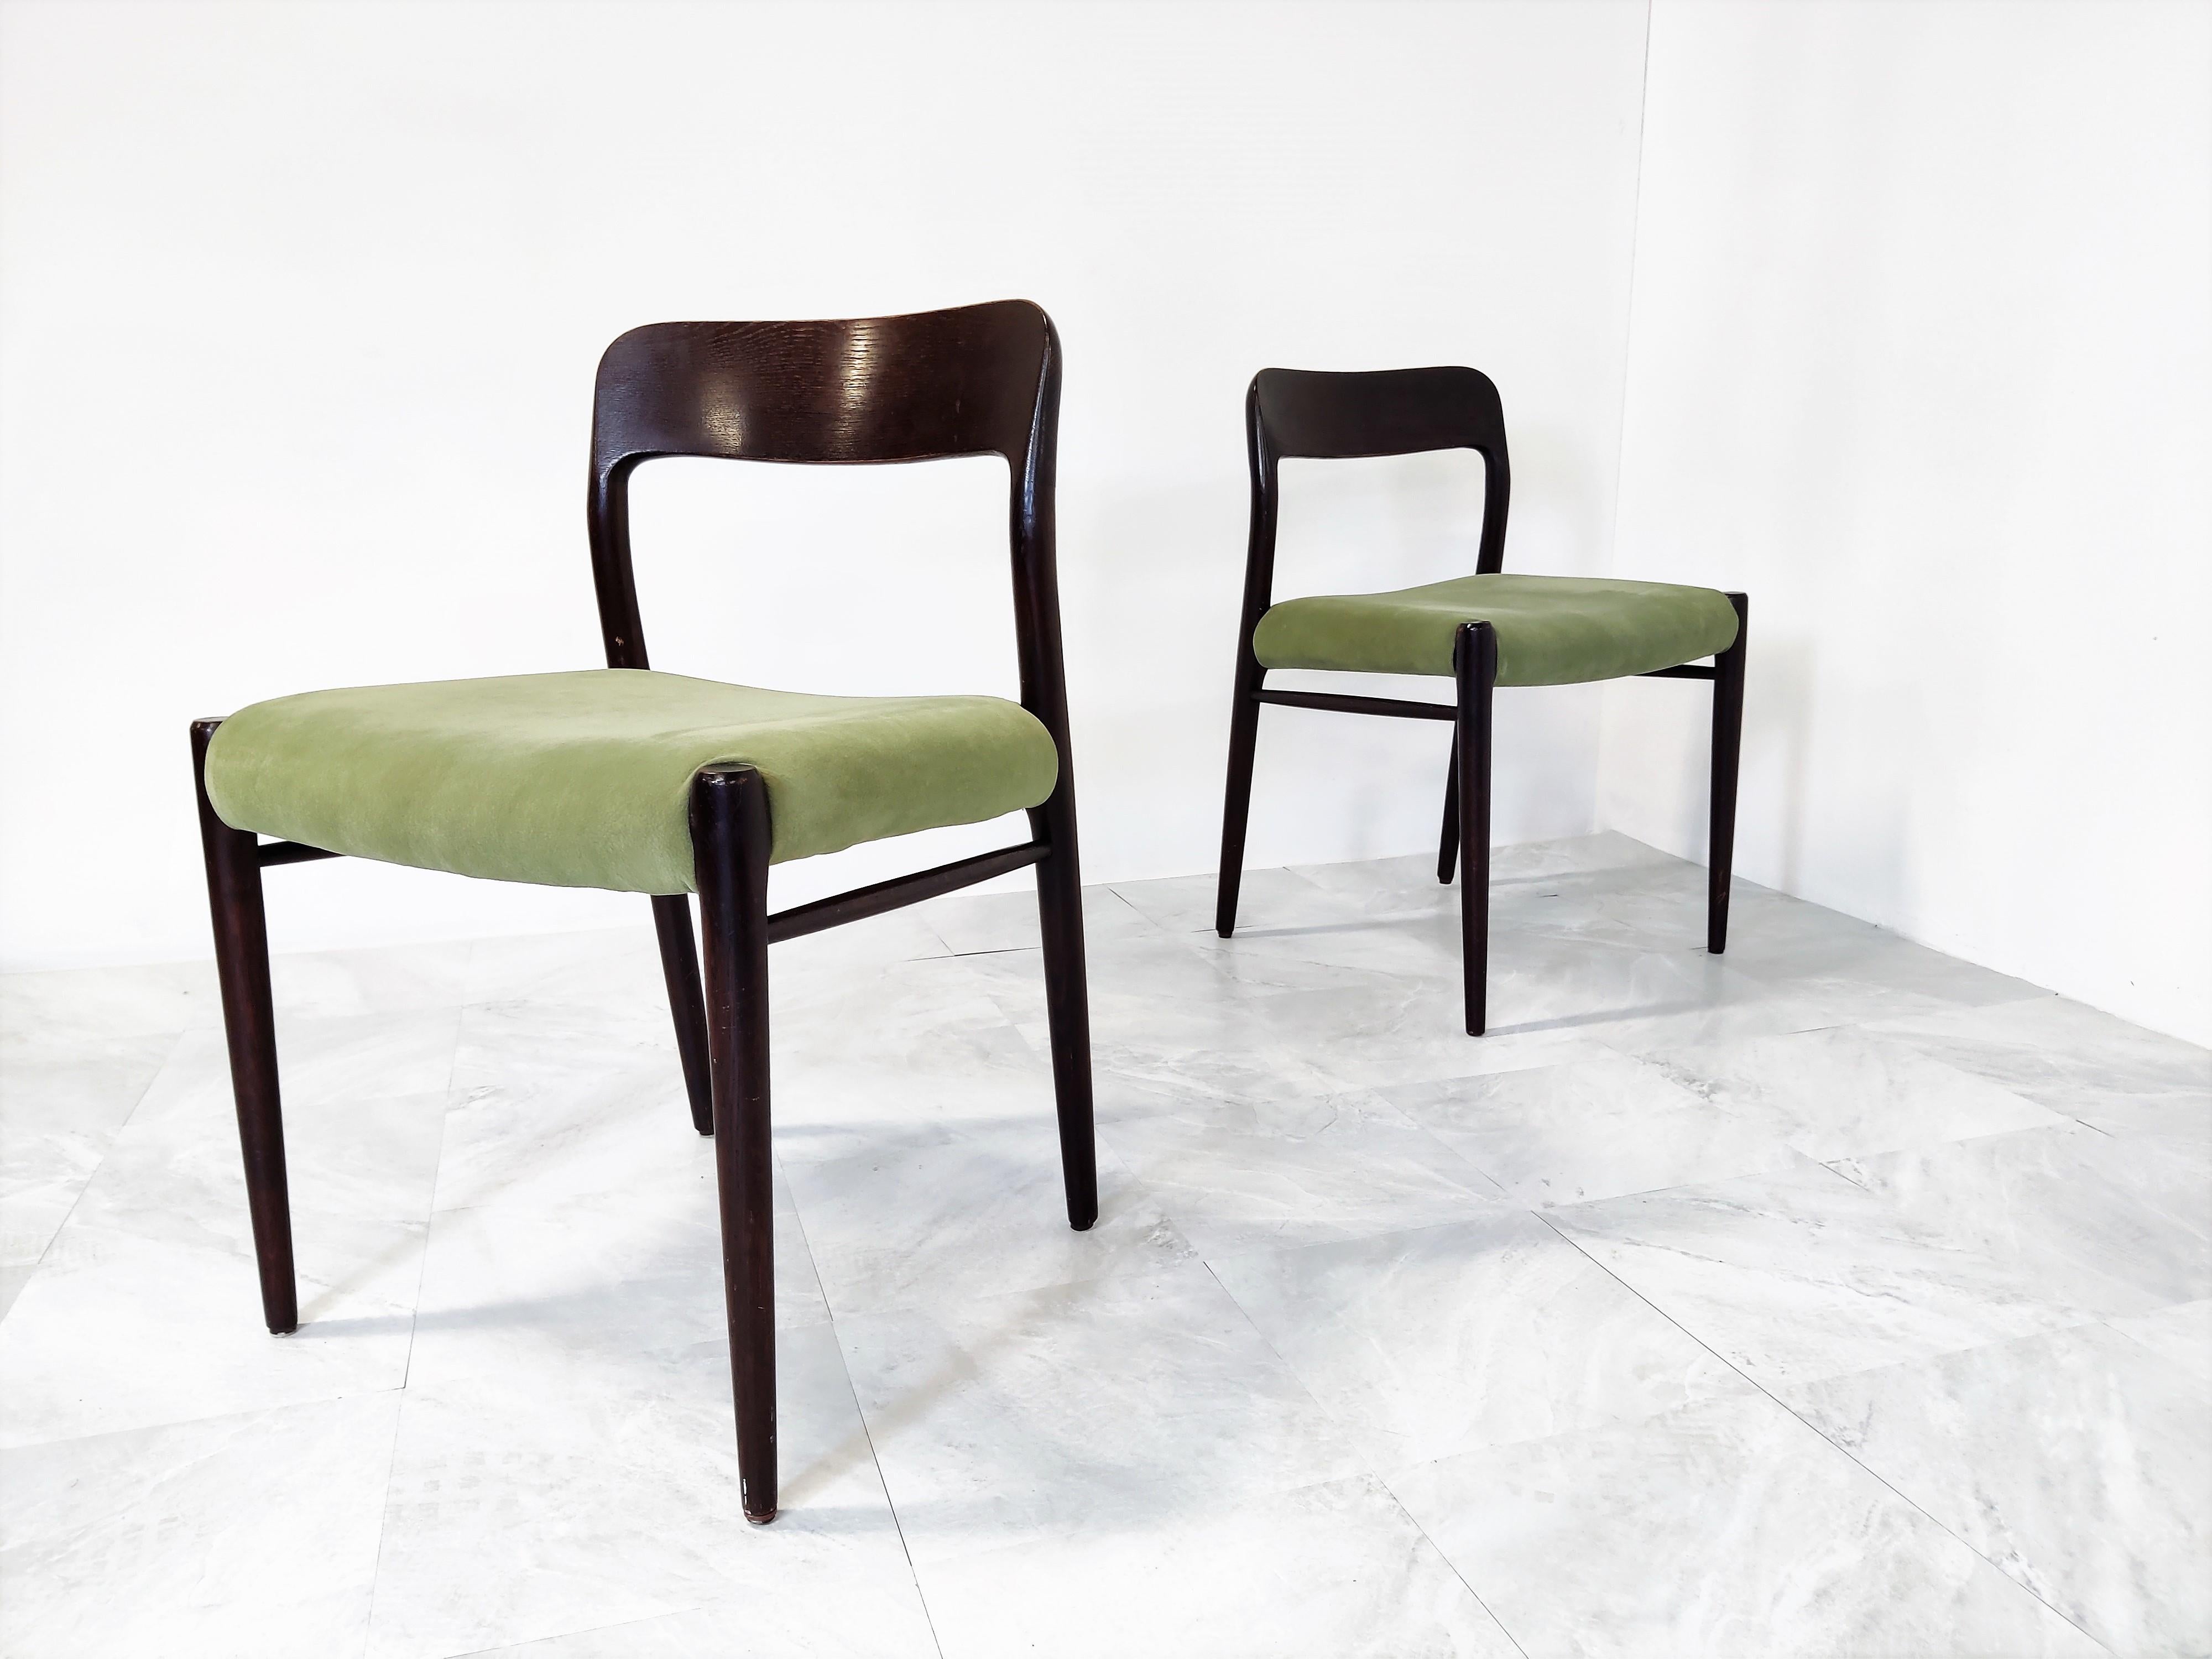 Fantastic set of 10 dining chairs designed by Niels Otto Moller upholstered in olive green suede.

Beautiful organic shaped wooden frames.

Very good condition.

1960s Denmark

Measures: height: 77 cm / 30.31